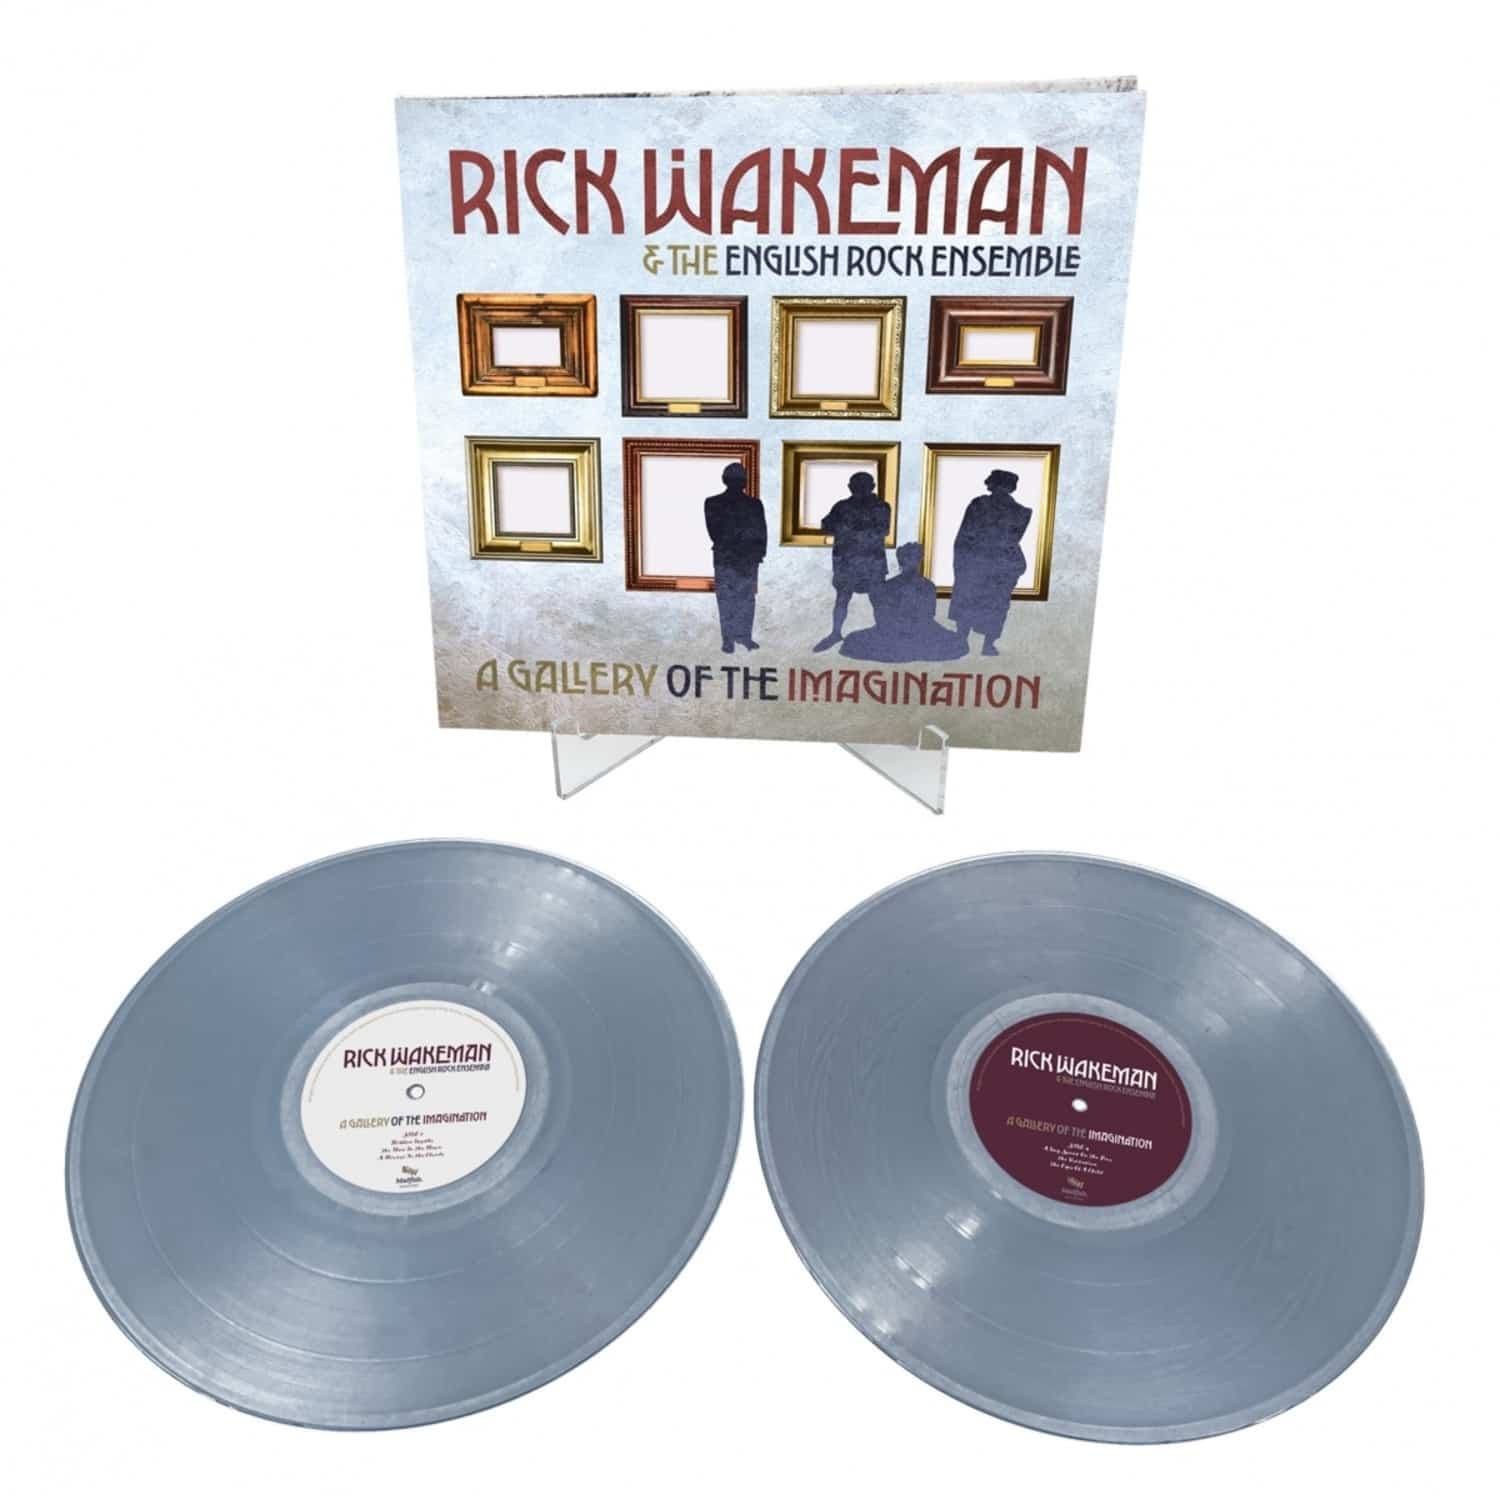 Rick Wakeman - A GALLERY OF THE IMAGINATION 